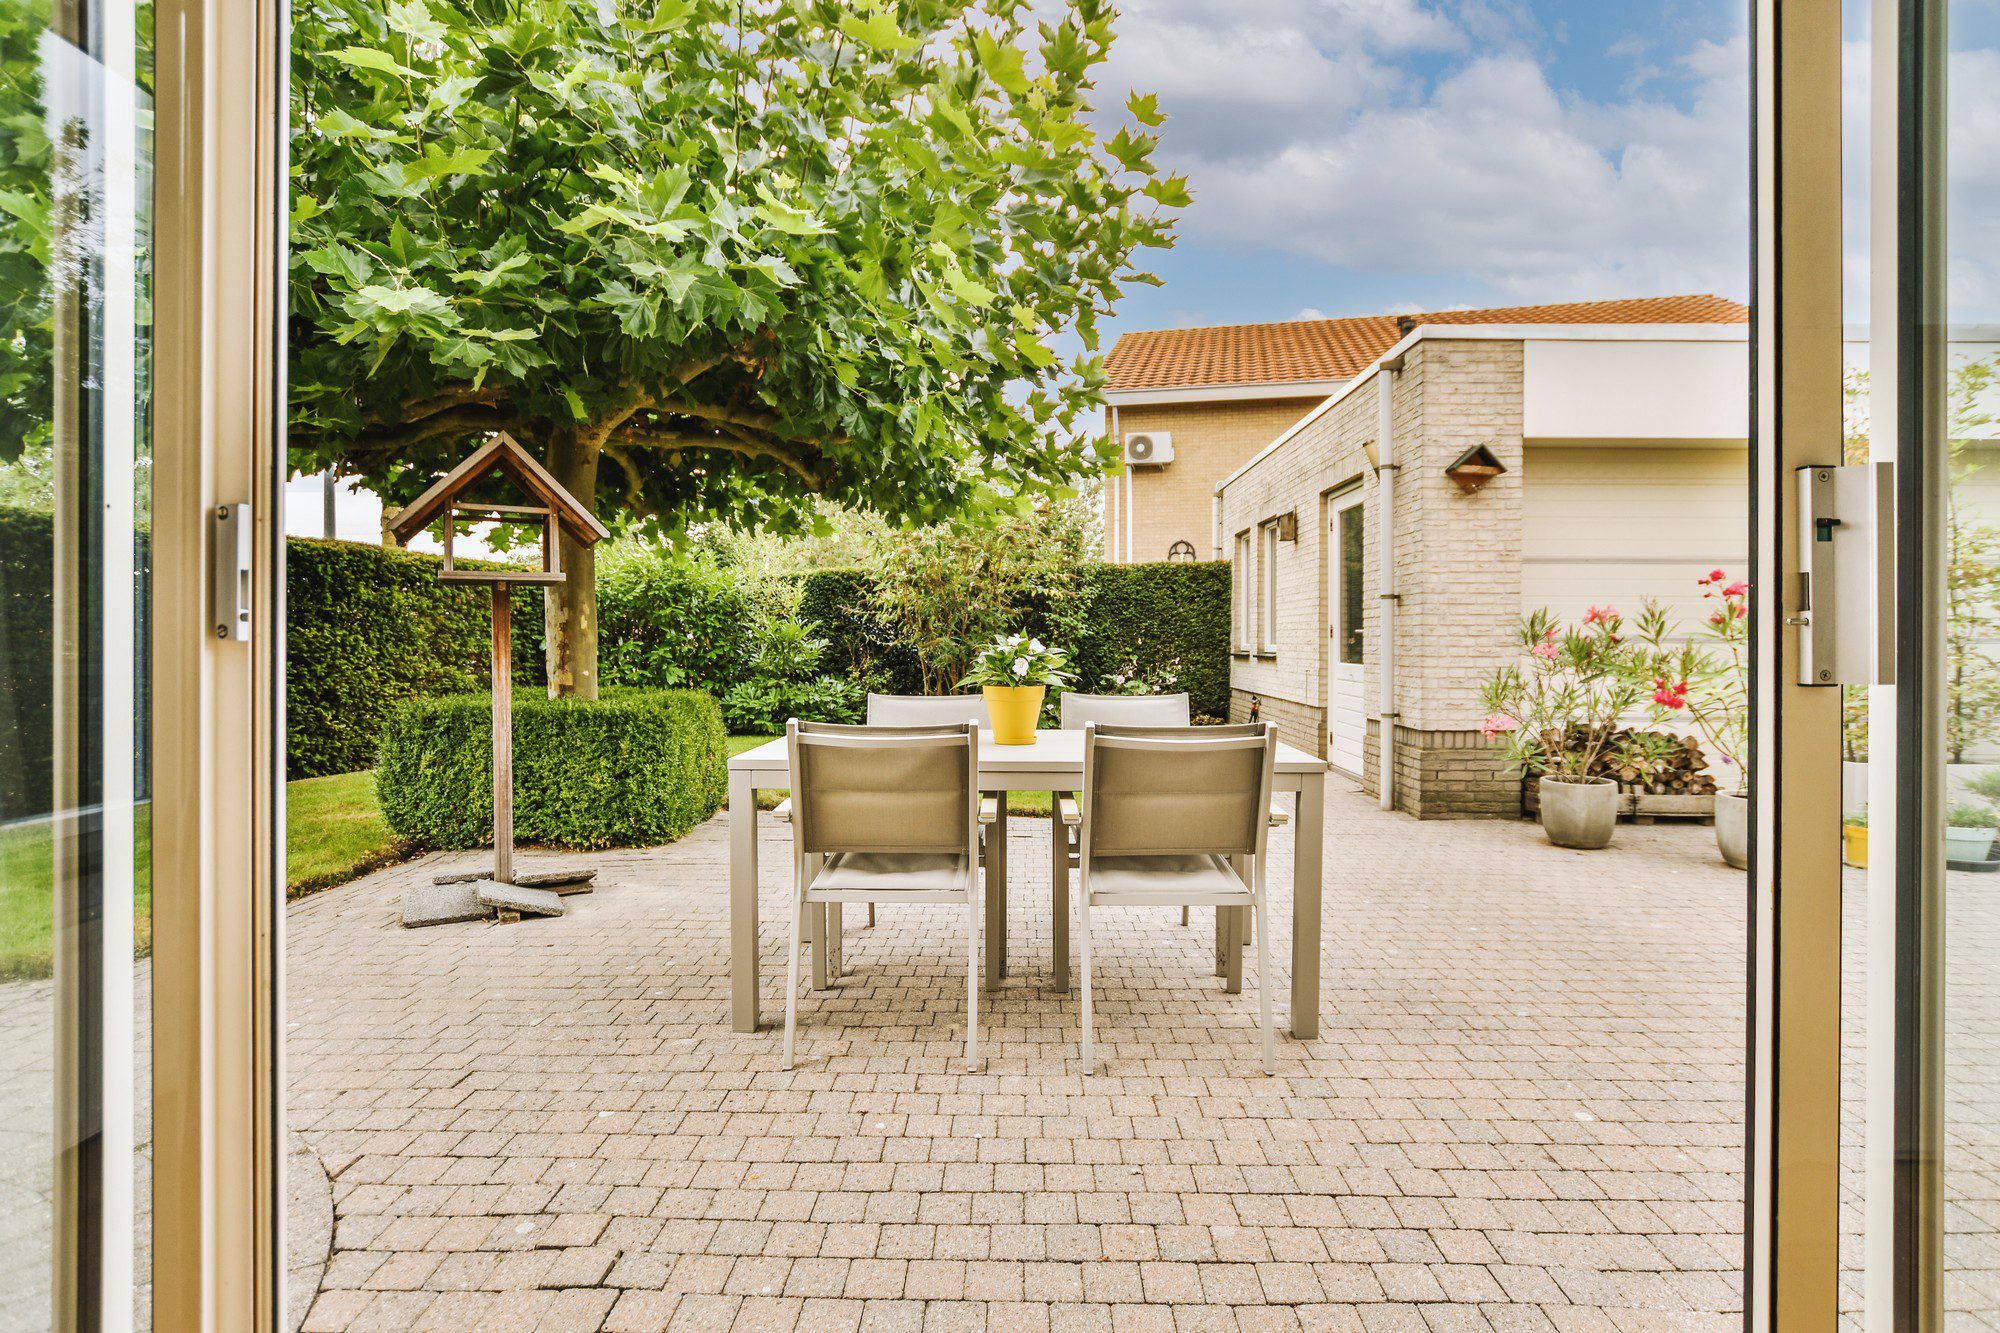 The image shows a neatly arranged outdoor patio area of a house. There is a modern patio dining set with a table and four chairs made of a metal frame and what looks like a textile seat and backrest. The table has a potted plant on it. This setup is on a paved area with interlocking stones.In the background, the garden is bordered by well-maintained hedges, and there's a large deciduous tree providing some shade to the area. A birdhouse stand is visible to the left of the tree. There are also some potted plants and a small garden bed with blooming flowers against the house wall.The view is from an interior perspective looking out, as discerned by the open double glass door at the forefront, providing a sense of indoor-outdoor living.No people are present in the image, which suggests a calm and peaceful setting seemingly designed for relaxation or socializing outdoors.